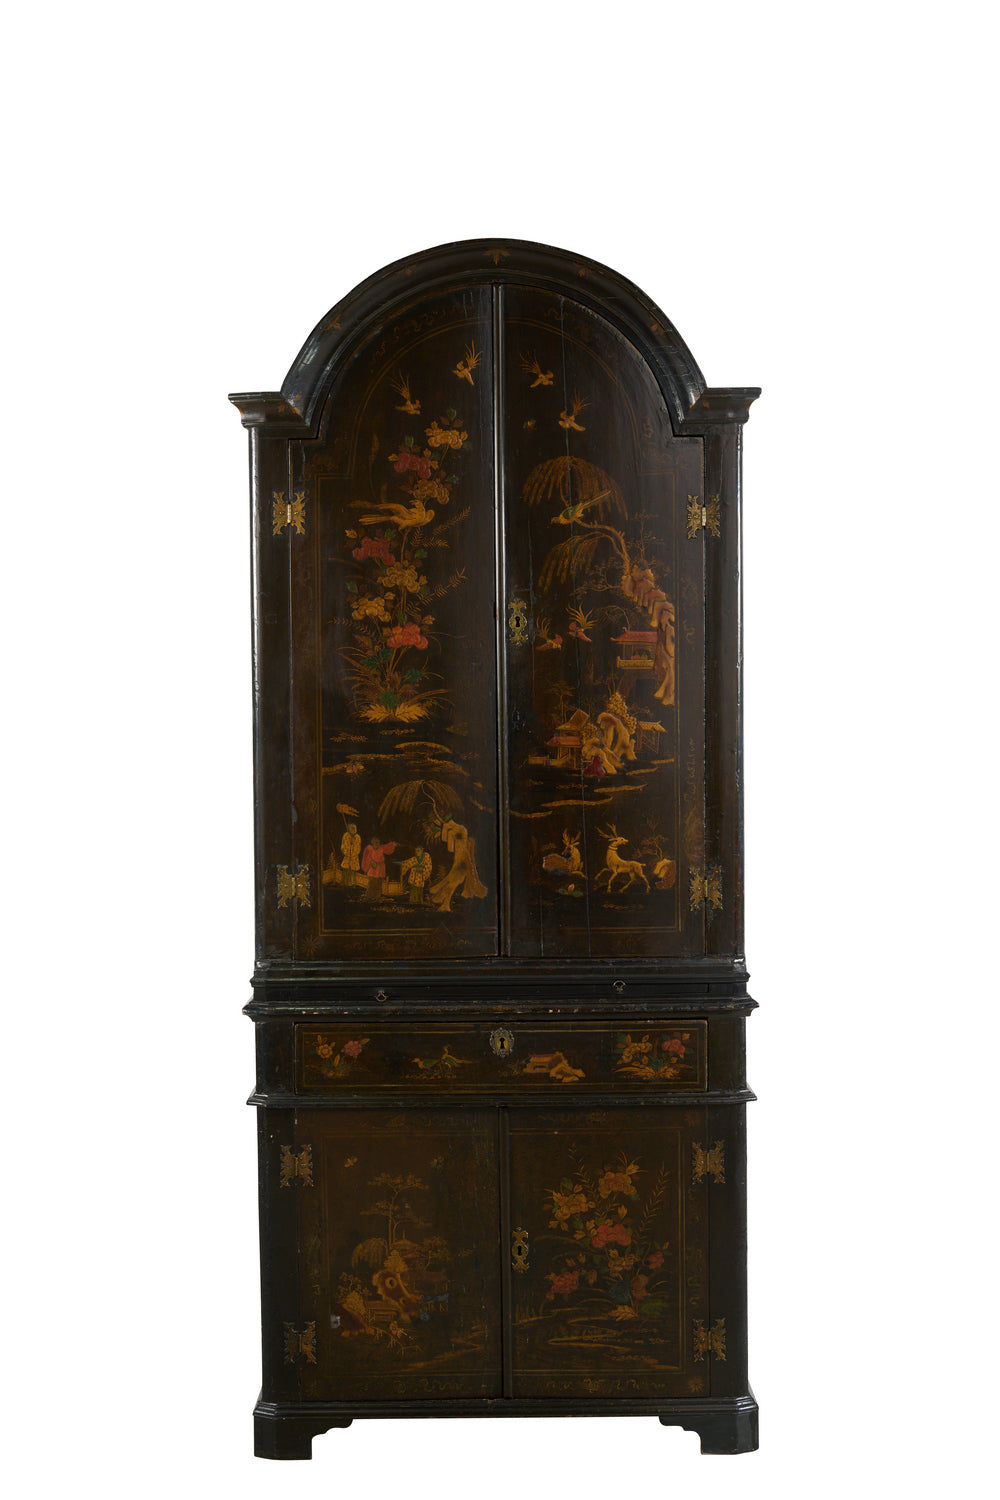 A CHINOISERIE LACQUERED CABINET Early 18th century